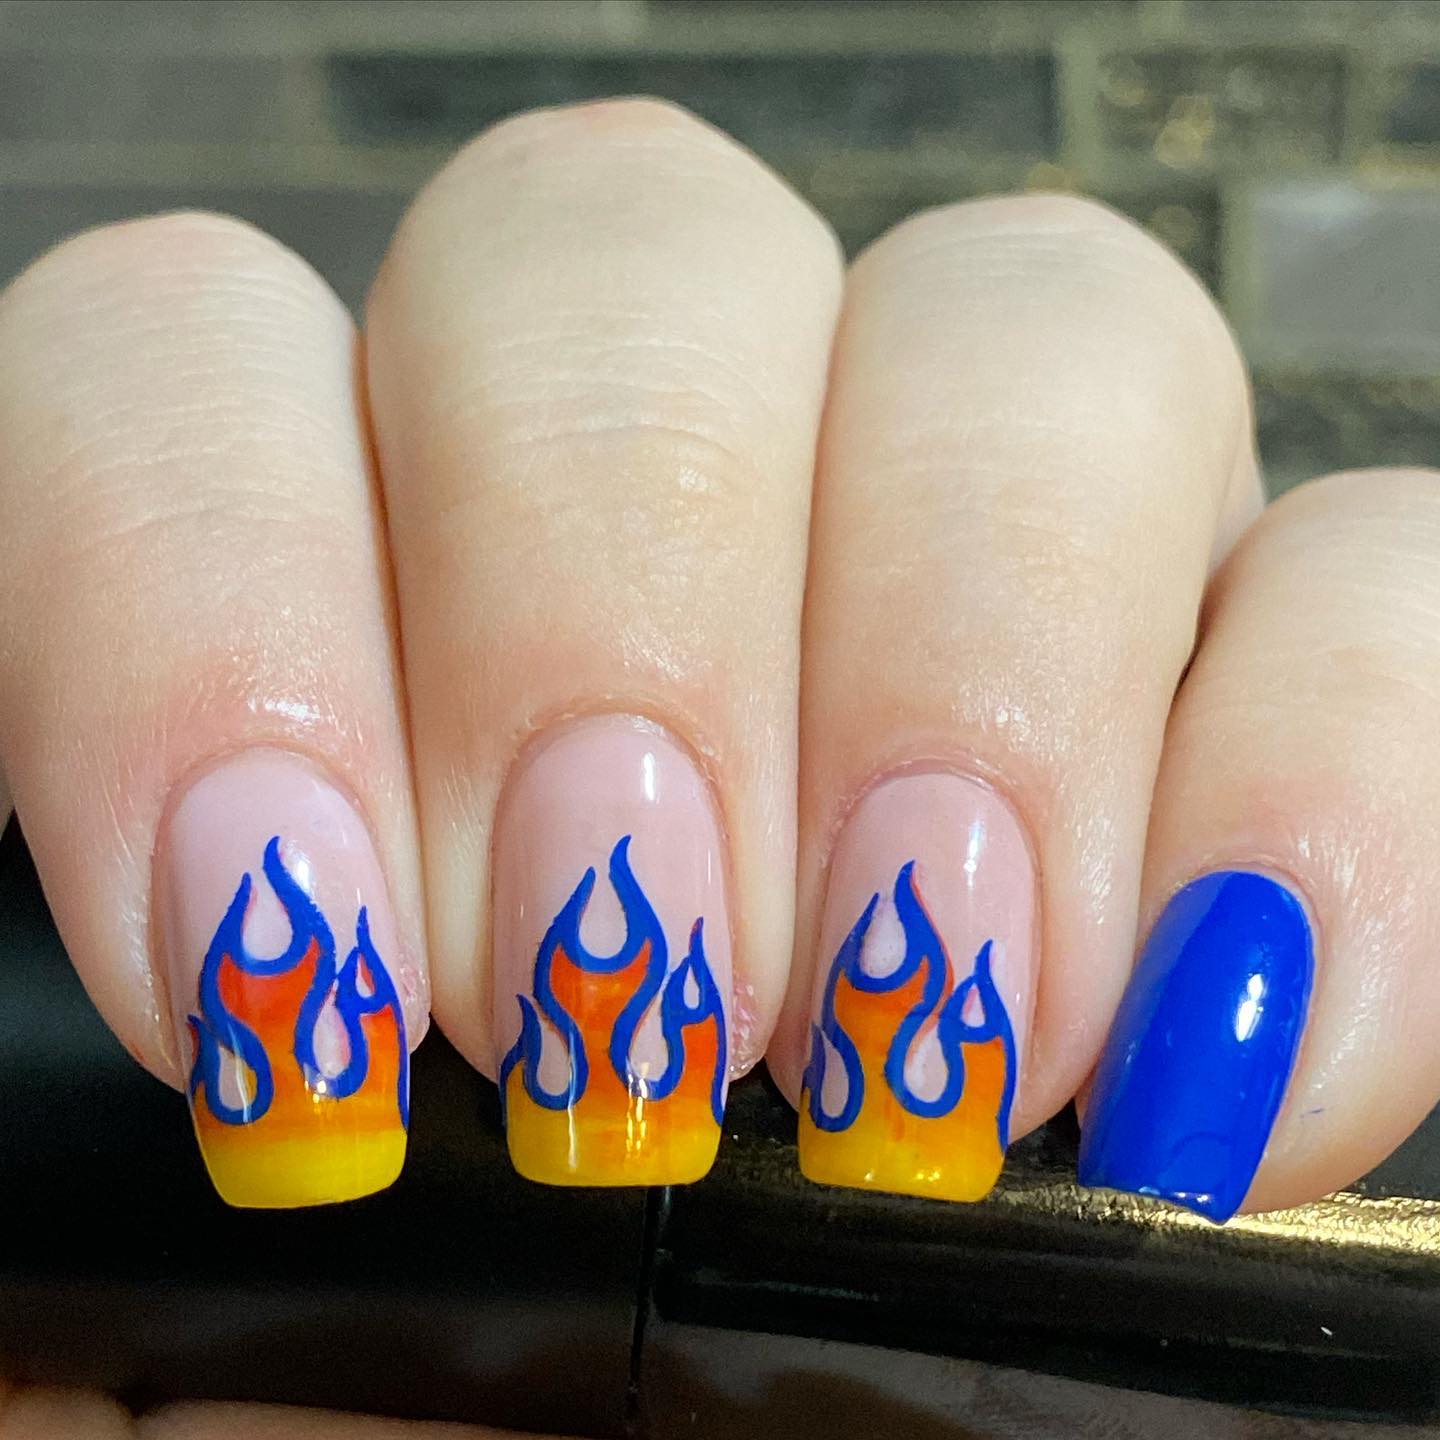 Red, orange and yellow colors are the colors of a flame but why don't you make them stand out more on your nails? If you want to do it, all you need to do is cover your flames with a dark blue nail polish.